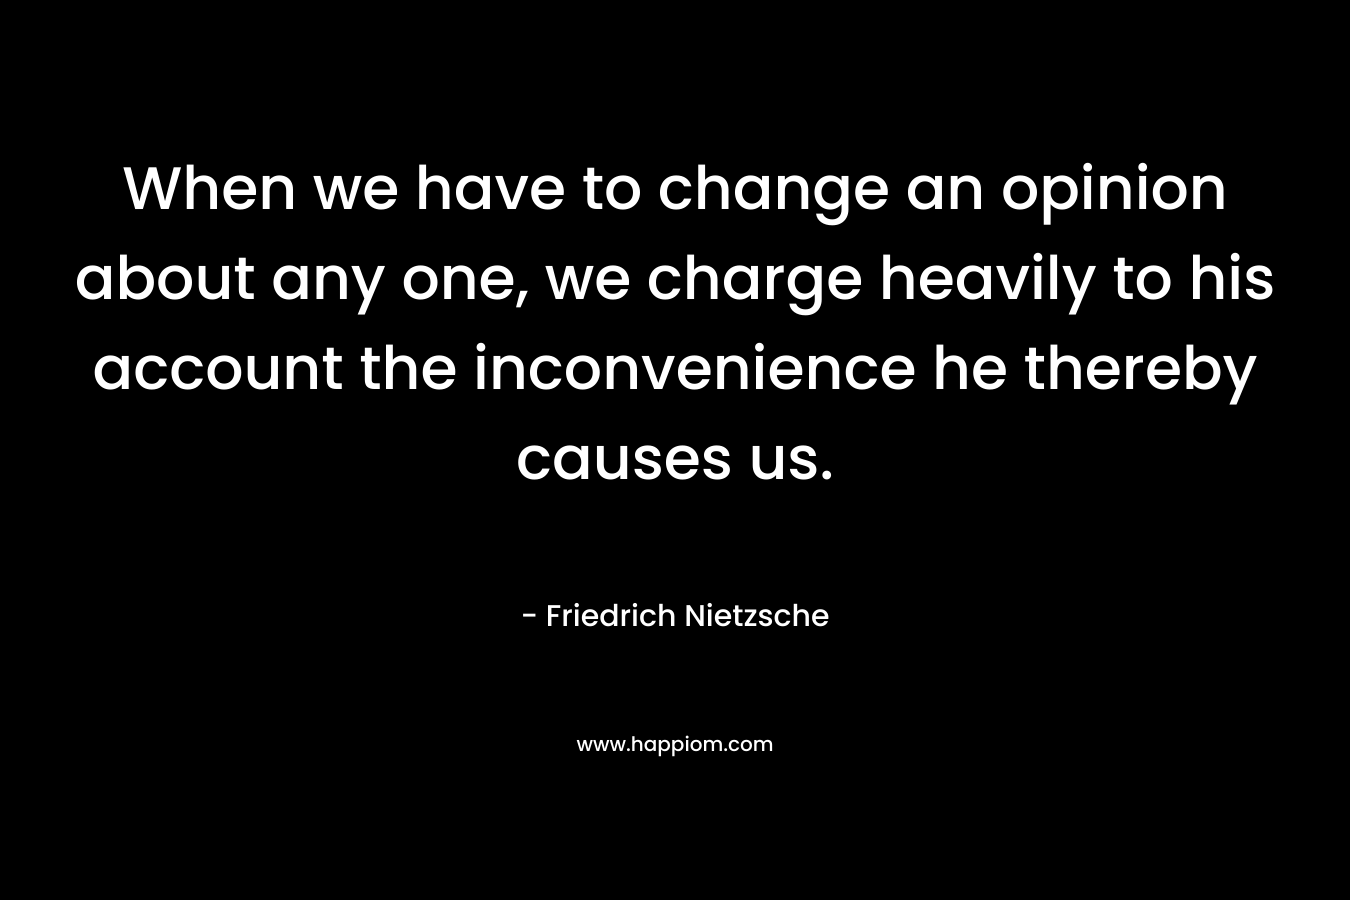 When we have to change an opinion about any one, we charge heavily to his account the inconvenience he thereby causes us.